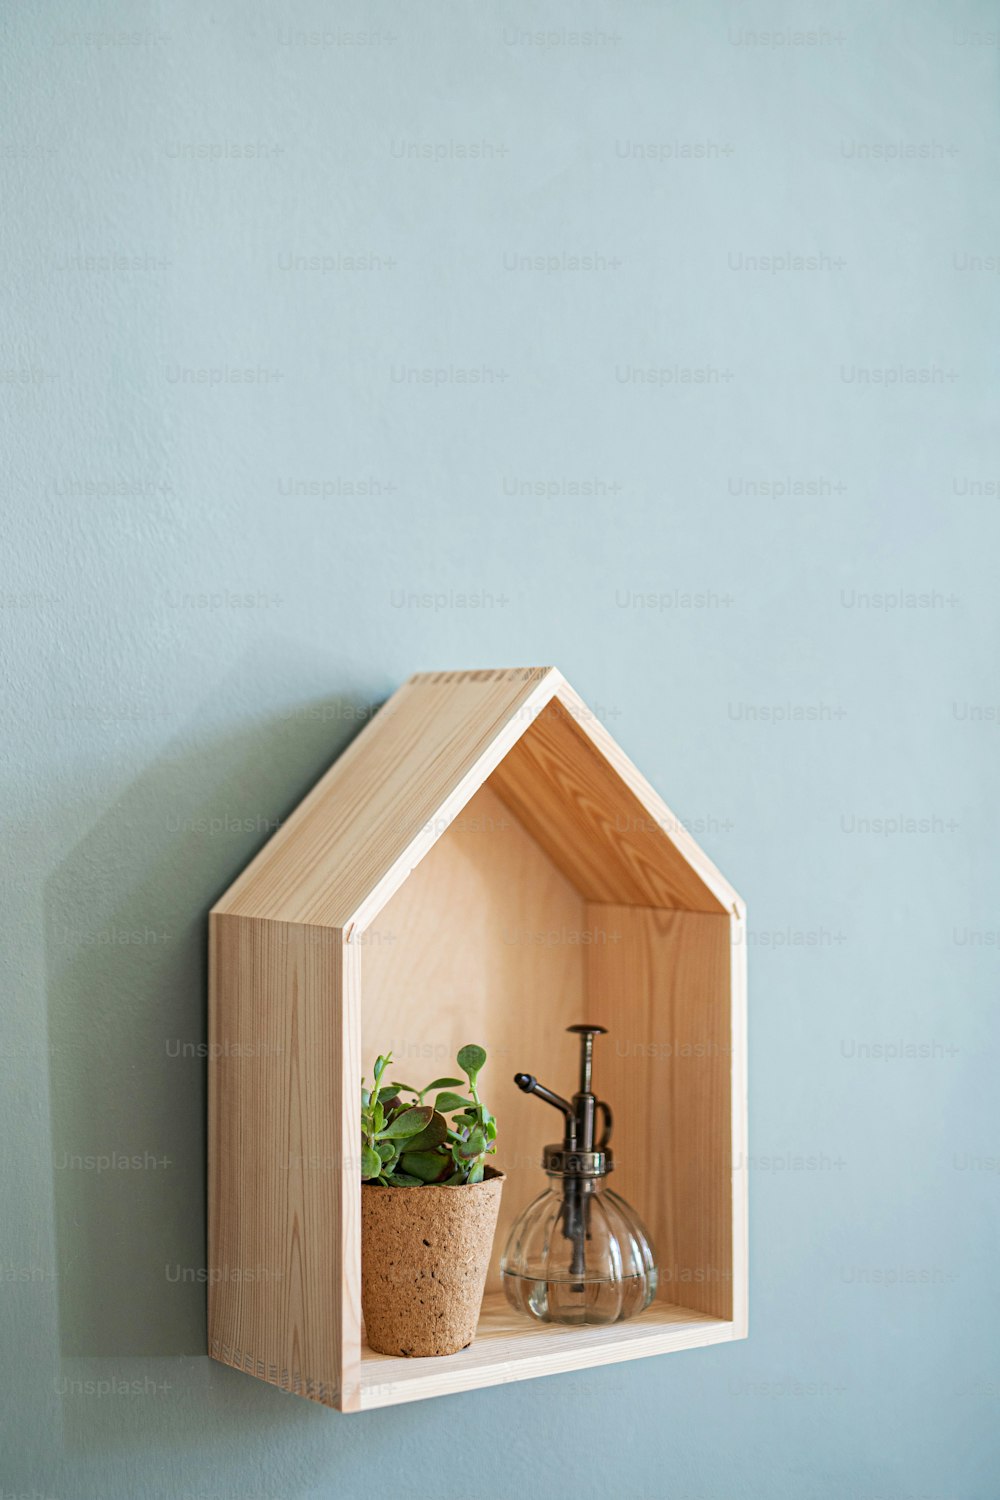 A wooden house shelf with decorations on the wall, natural decor concept.